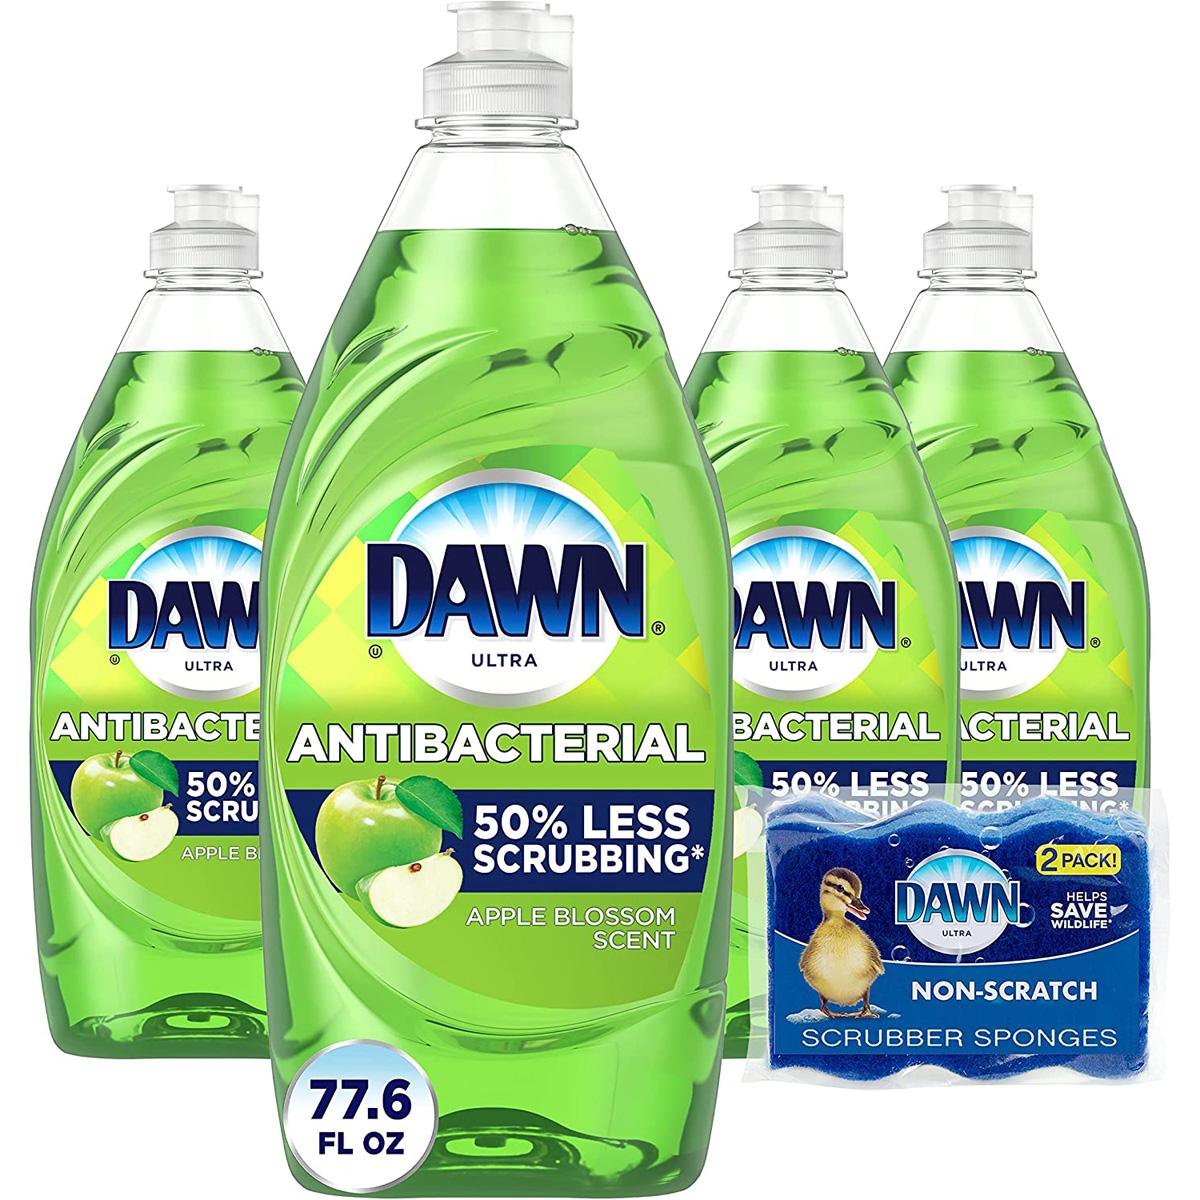 Dawn Antibacterial Hand Soap 4 Pack for $12.21 Shipped